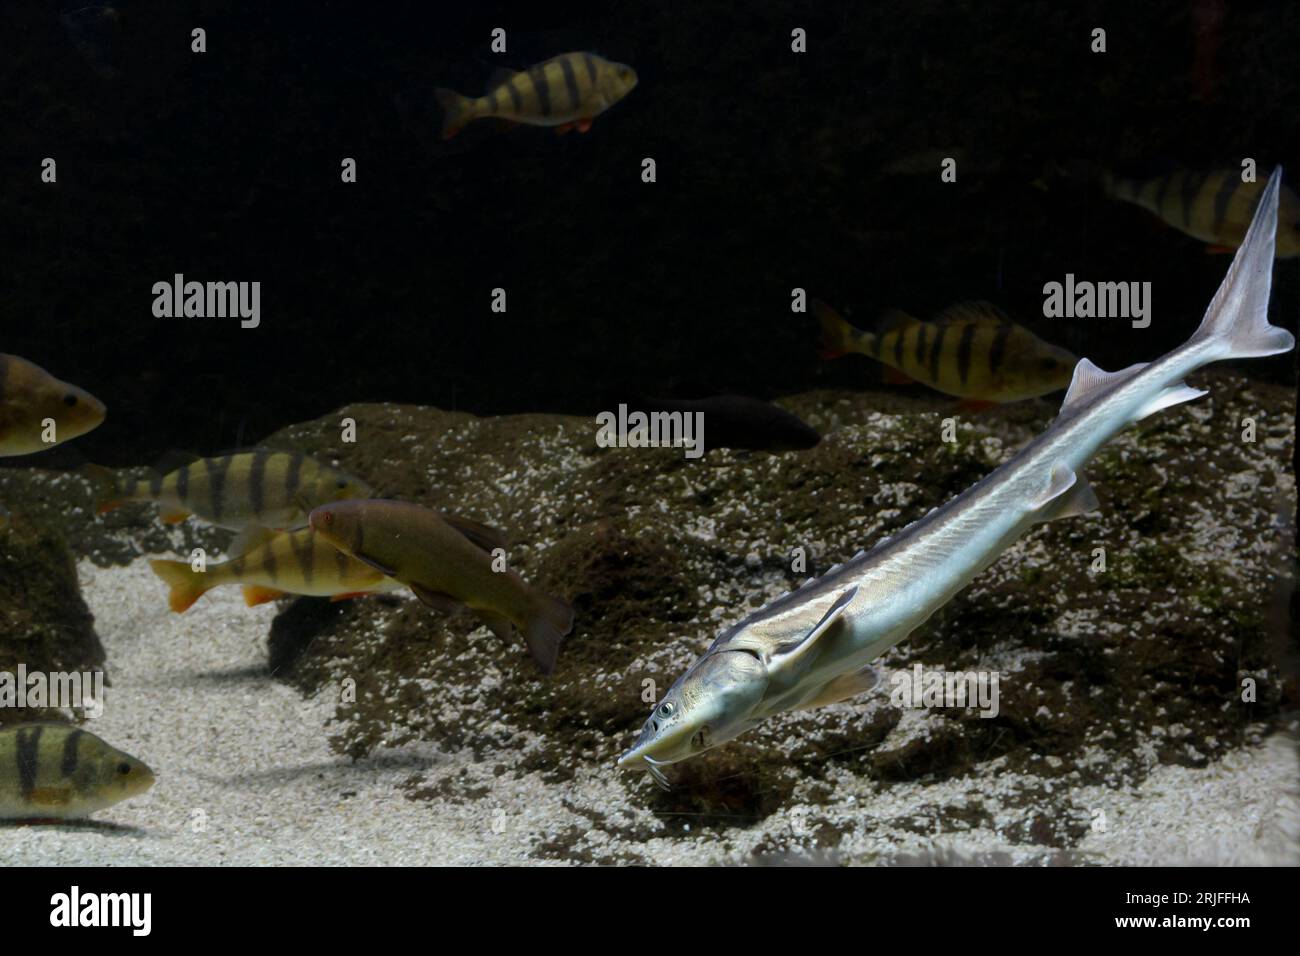 Sturgeon underwater in the aquarium with other fishes Stock Photo